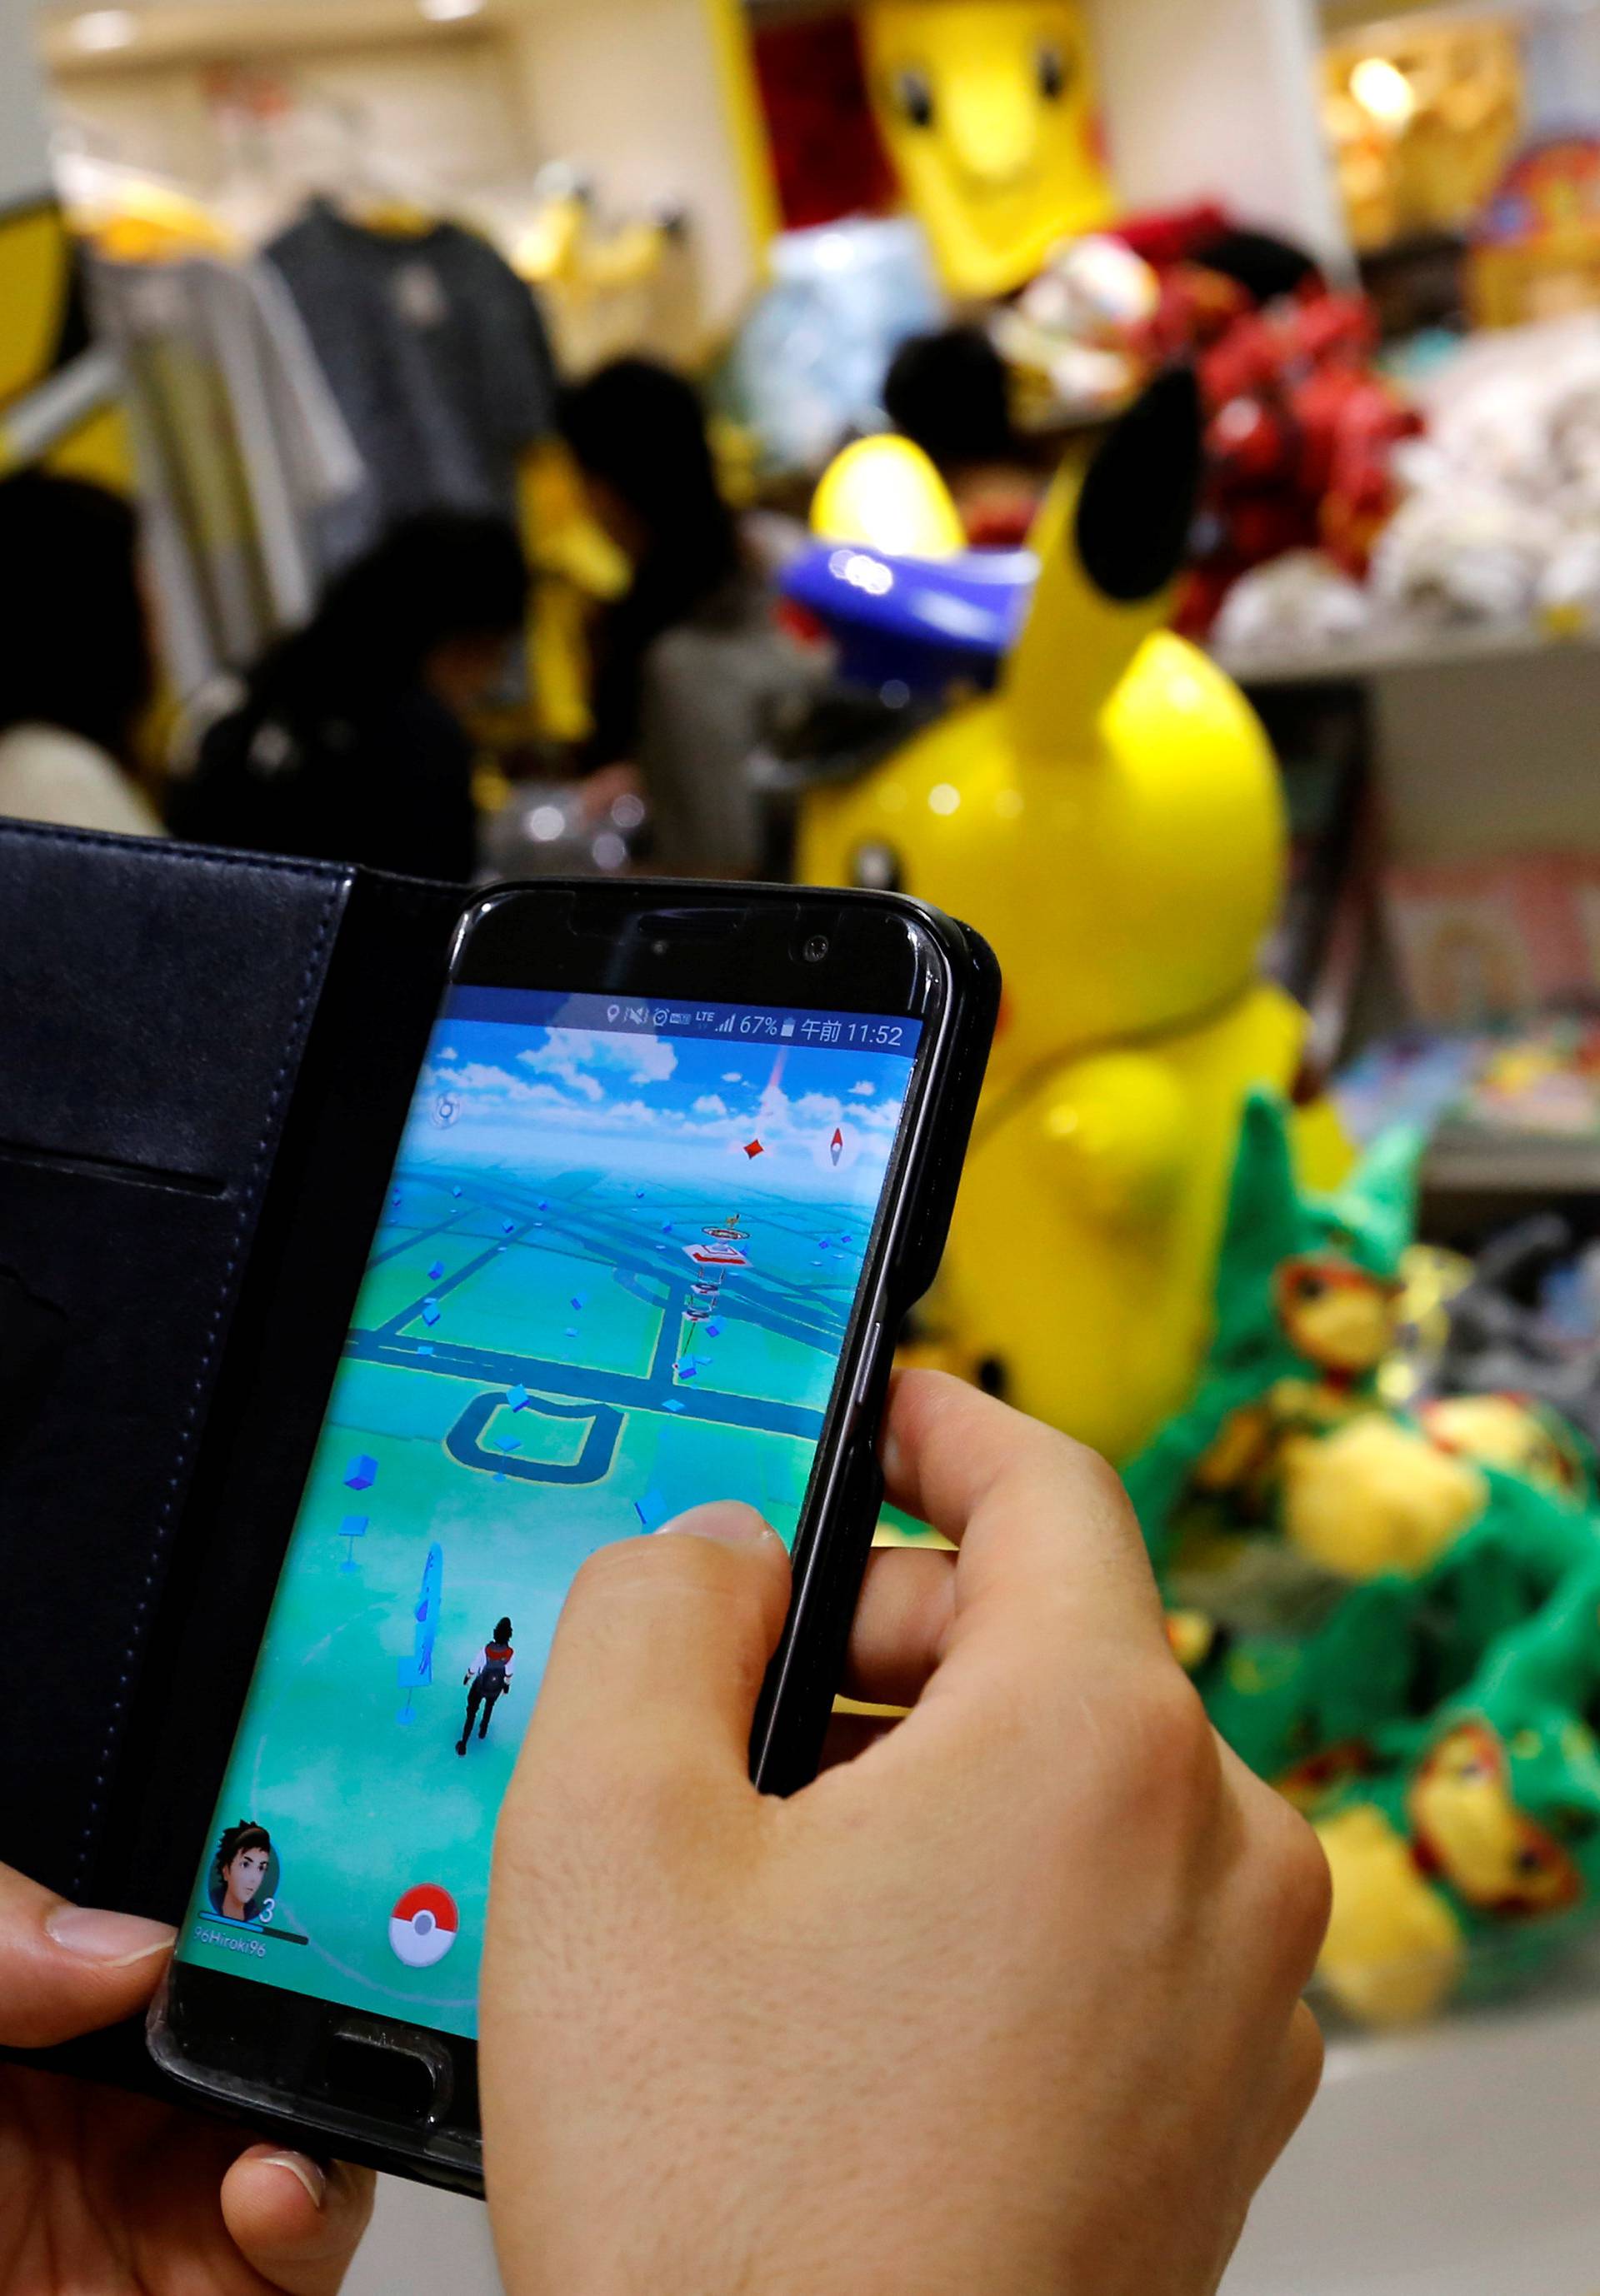 A man plays the augmented reality mobile game "Pokemon Go" by Nintendo in front of a shop selling Pokemon goods in Tokyo